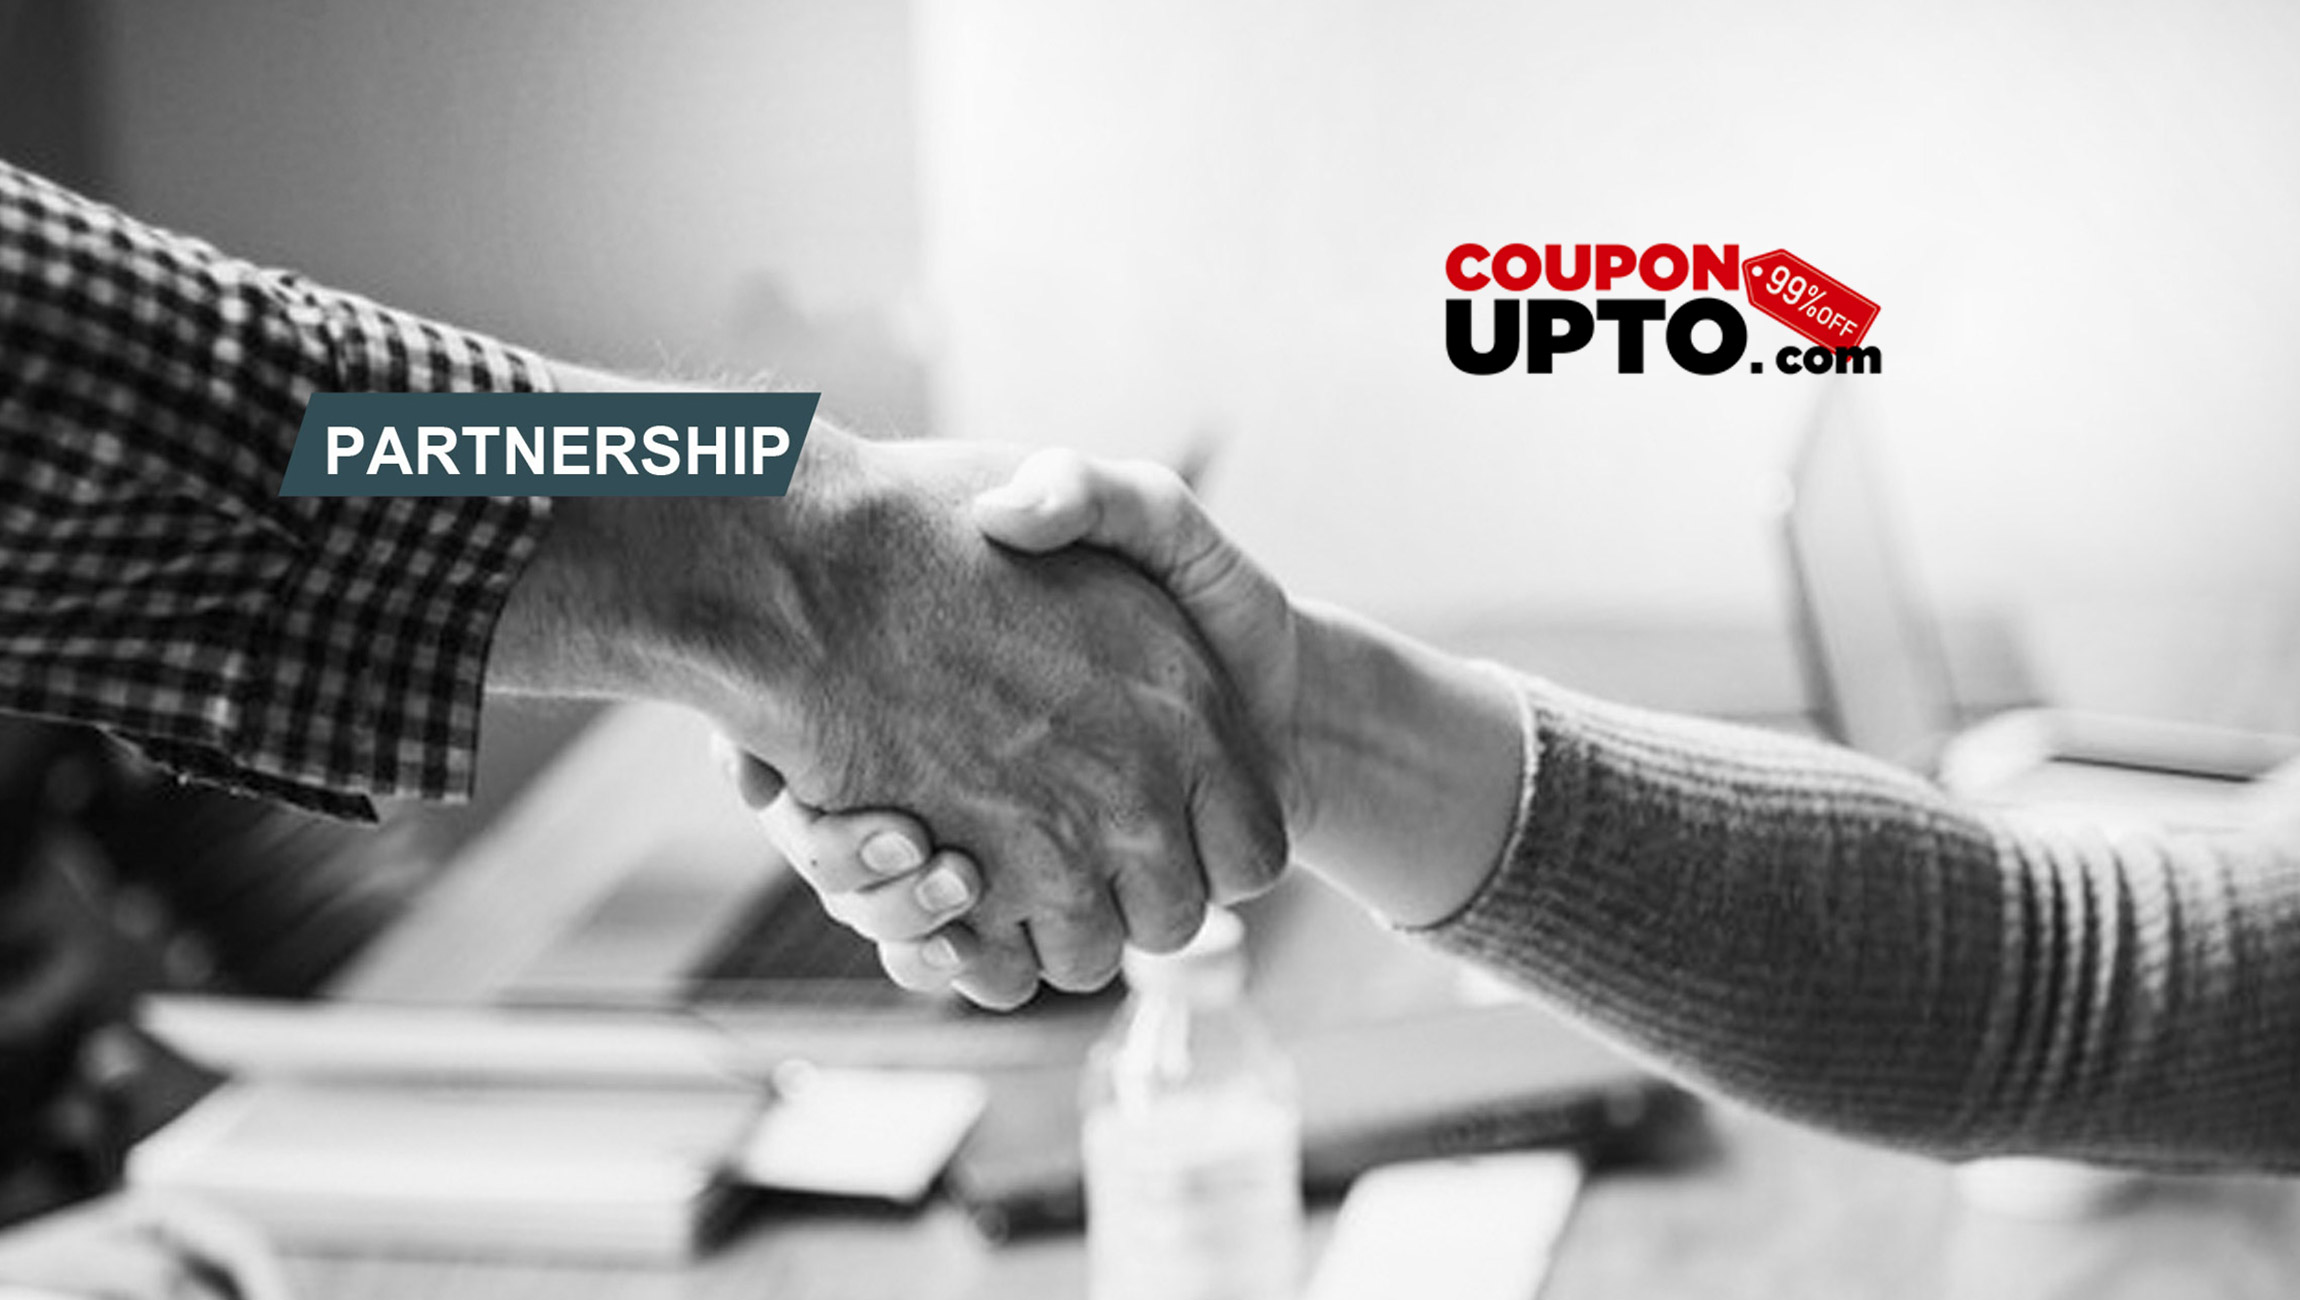 CouponUpto Launches Partner Program with 1000+ Best Black Friday Deals 2021